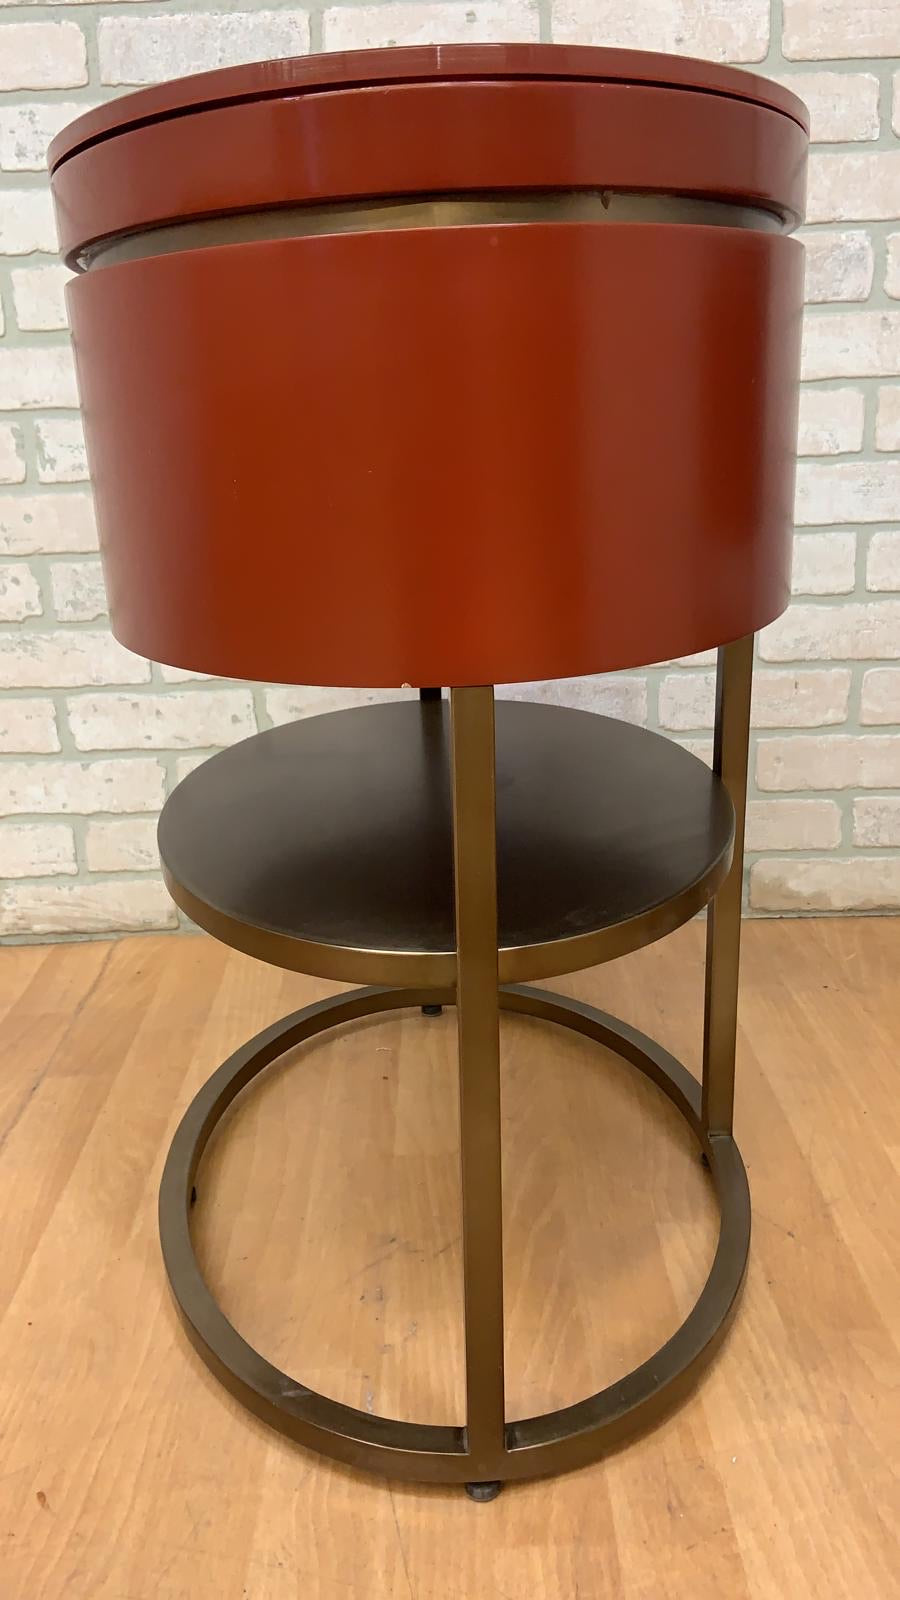 Vintage Contemporary Custom Designed Oval Side Table/Night-Stands - Pair